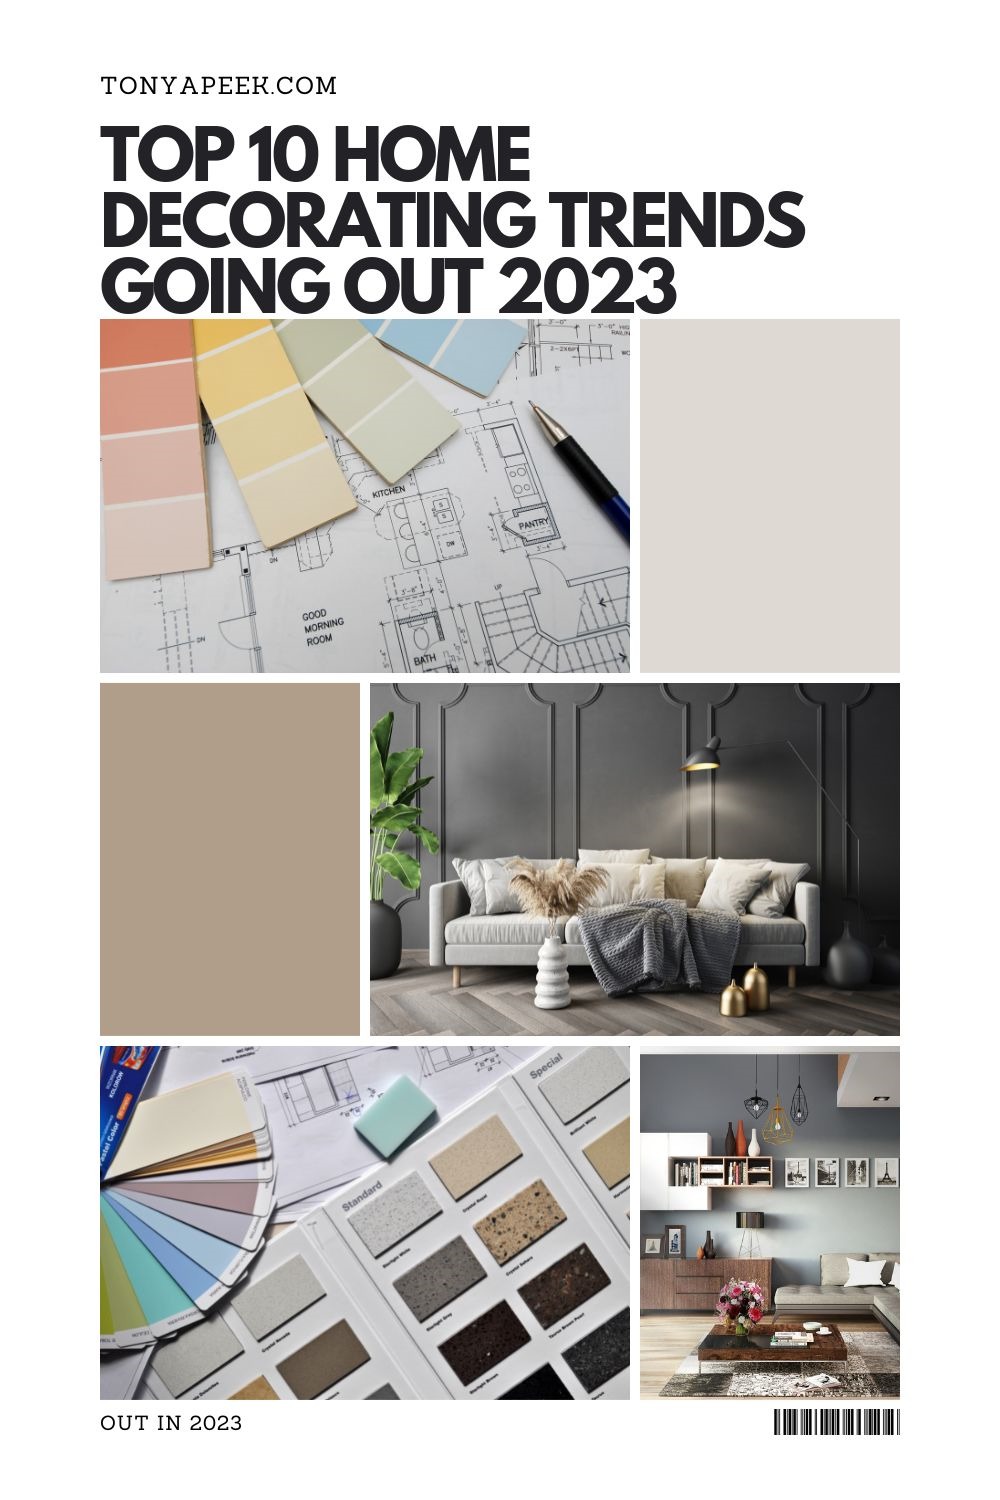 14331 Top 10 Home Decorating Trends Going Out 2023 